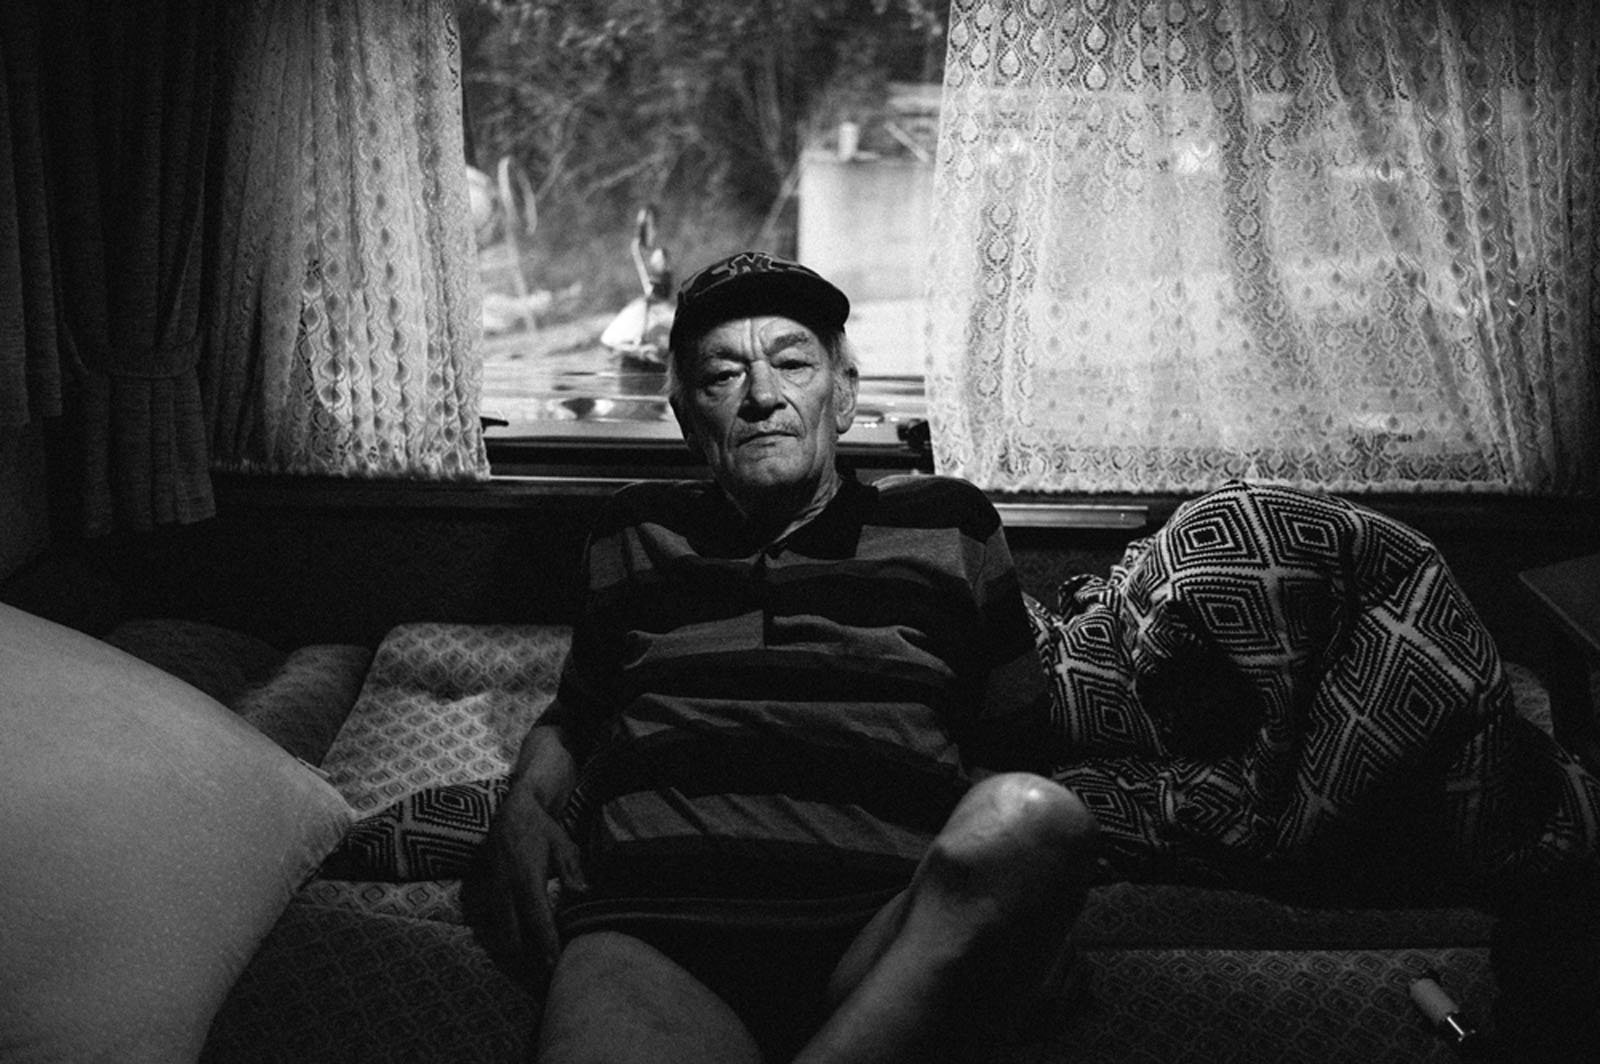 Old Man. from Ether, a photobook by hispanic photographer Joe Aguirre that explores the quiet moments, the in between, the parts of our experience that we just don’t seem to have words for. Photo by Joe Aguirre (joeaguirrephotography.com) / Burn My Eye.